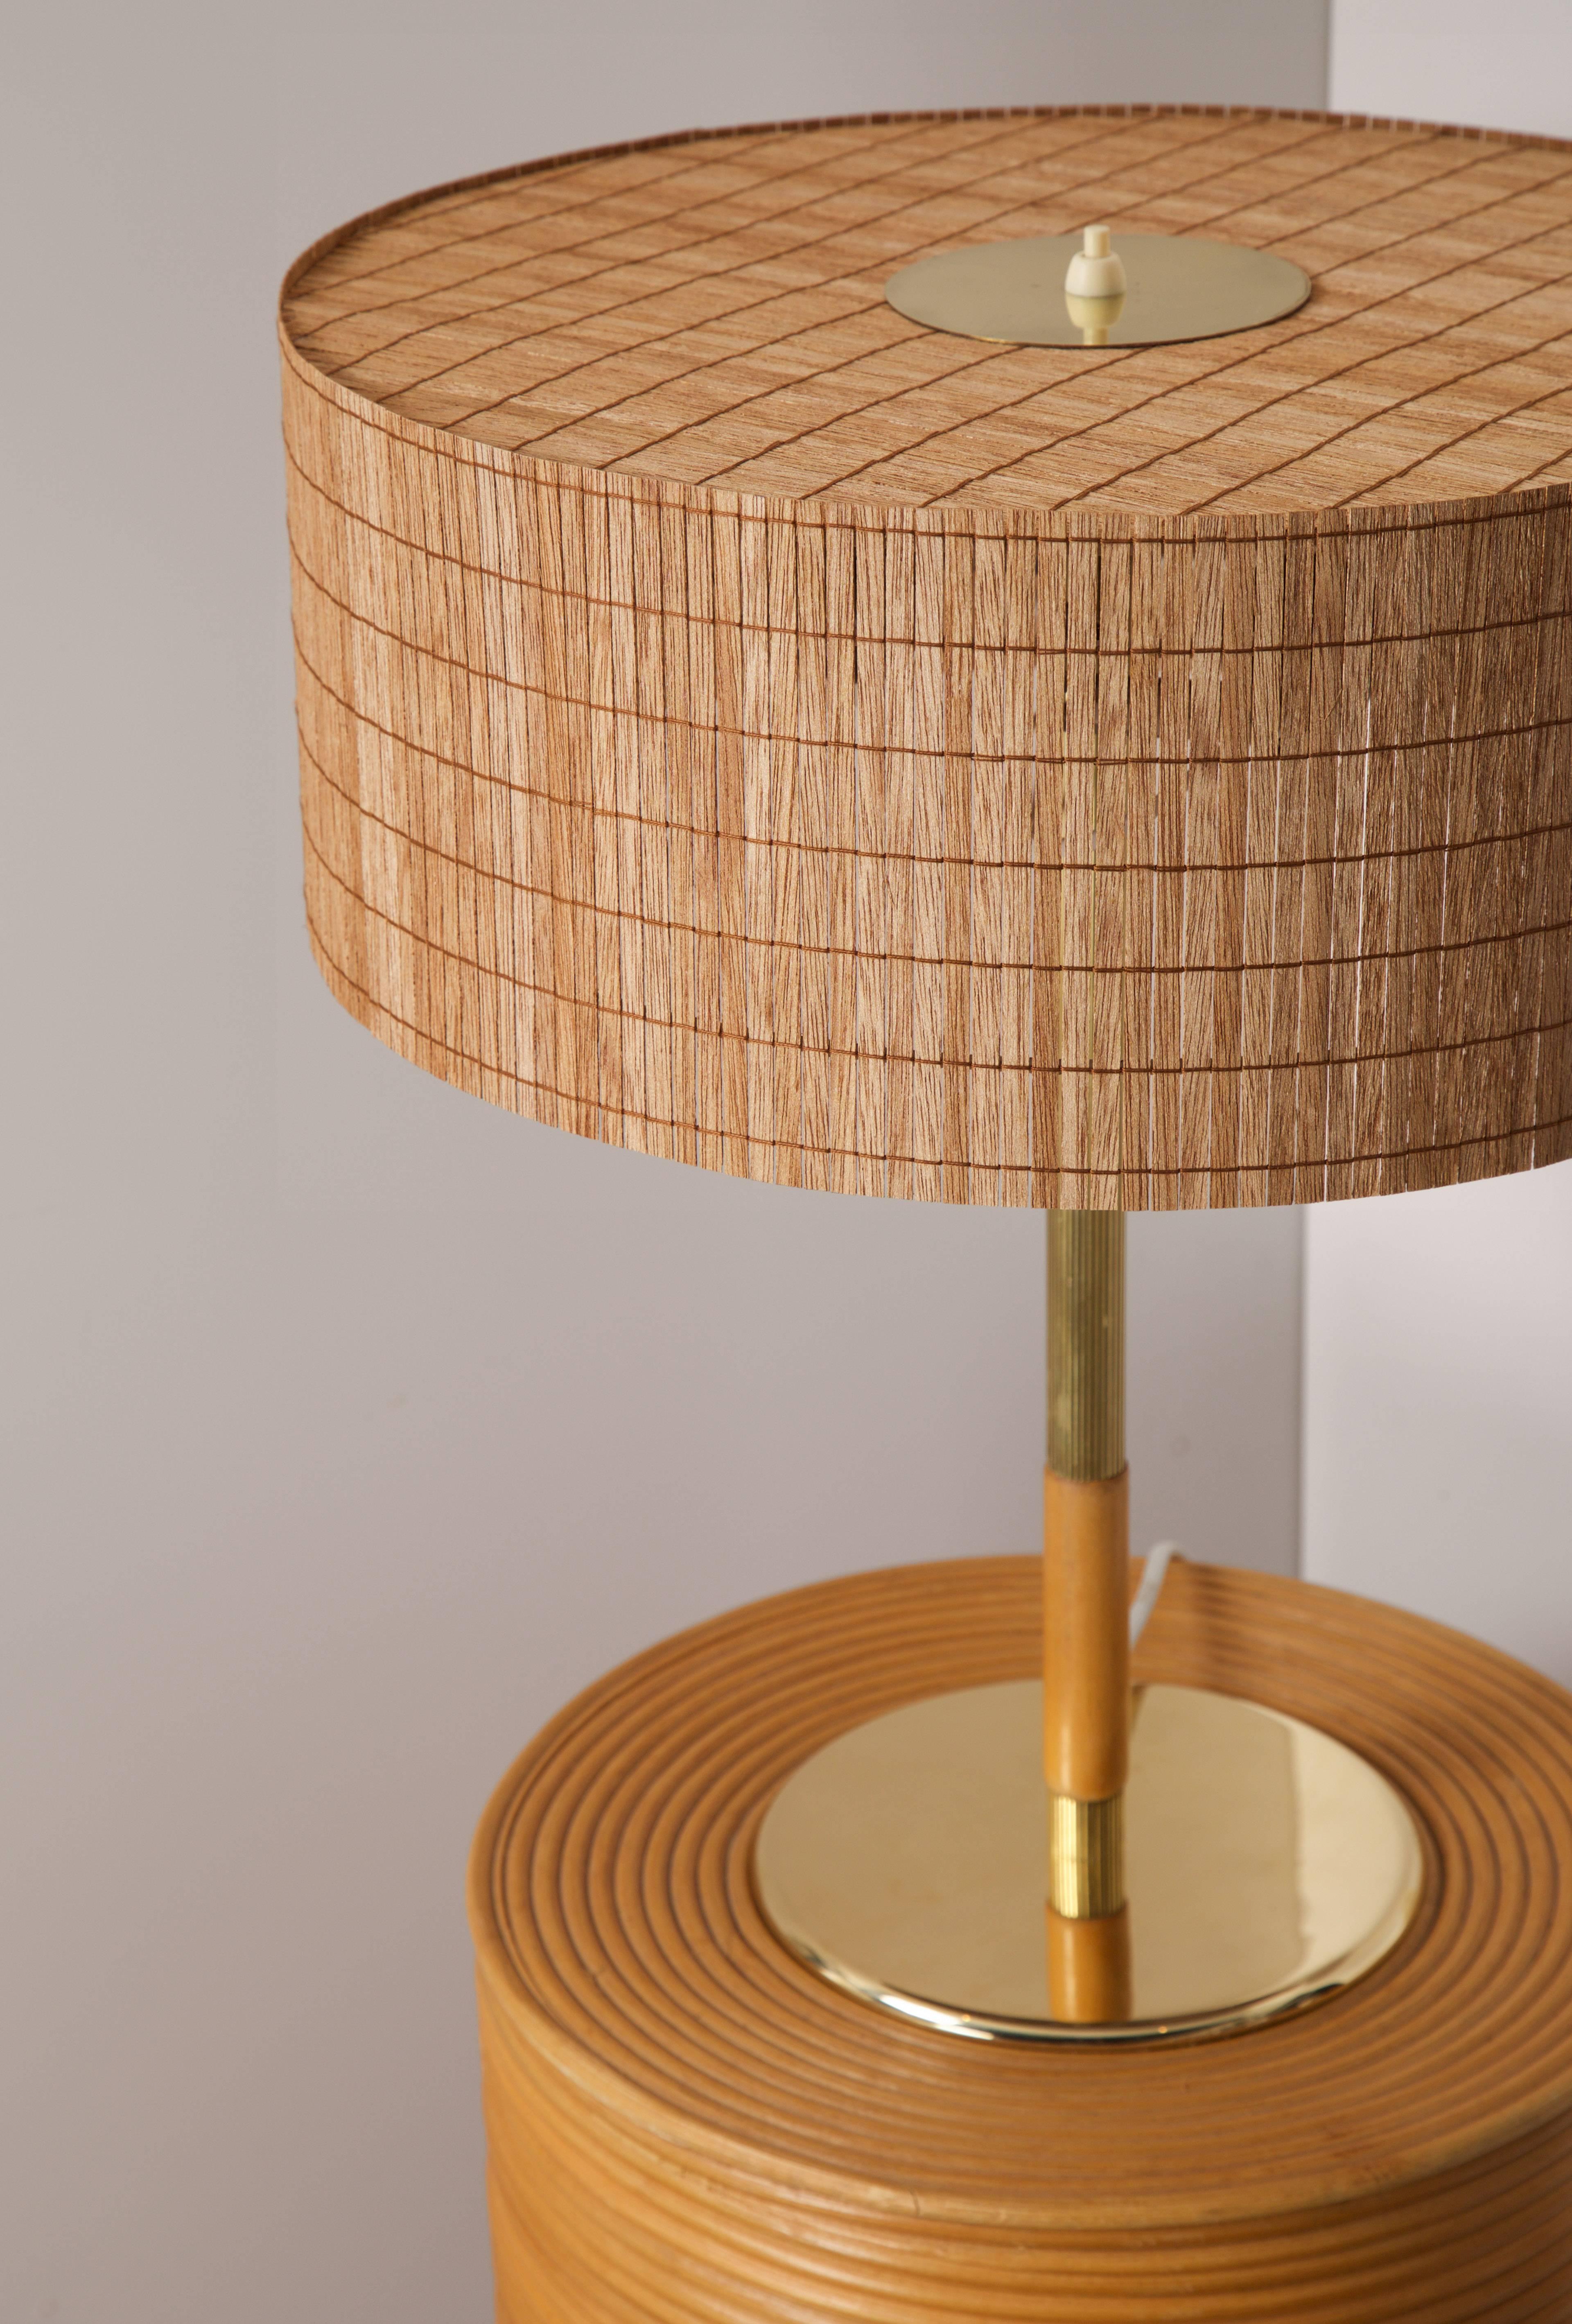 Finnish Paavo Tynell Table Lamp, Model 9206, Taito Oy, Finland, 1940s